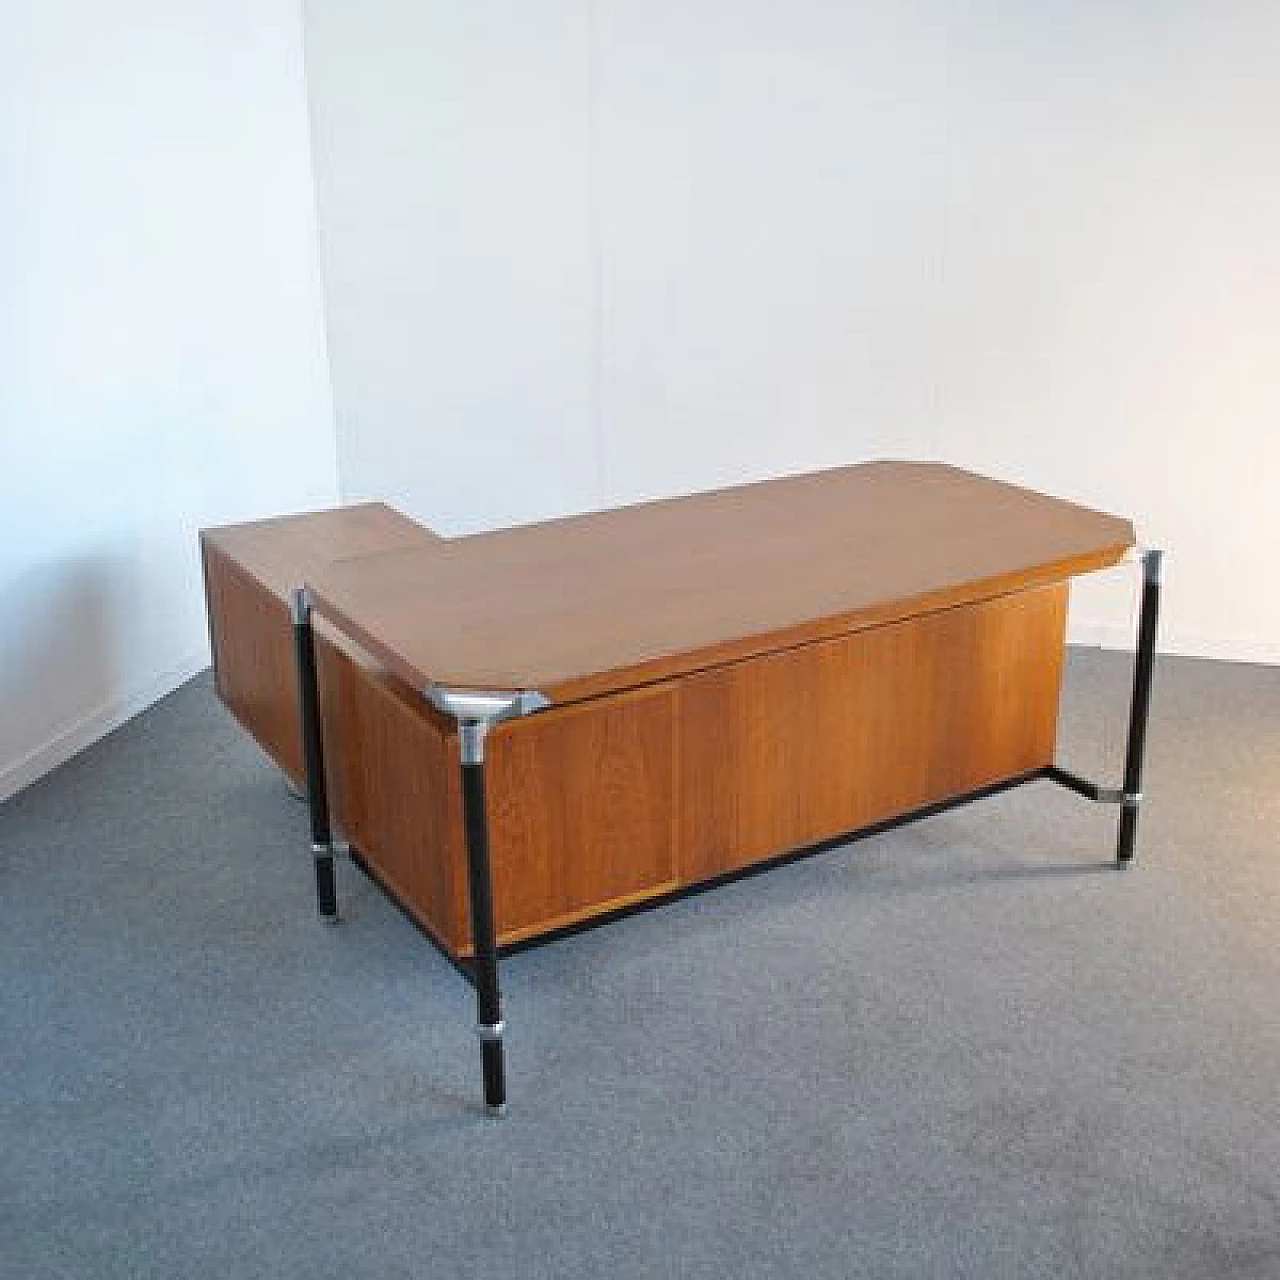 Executive desk by Ico Parisi for MIM Rome, 1950s 1452496